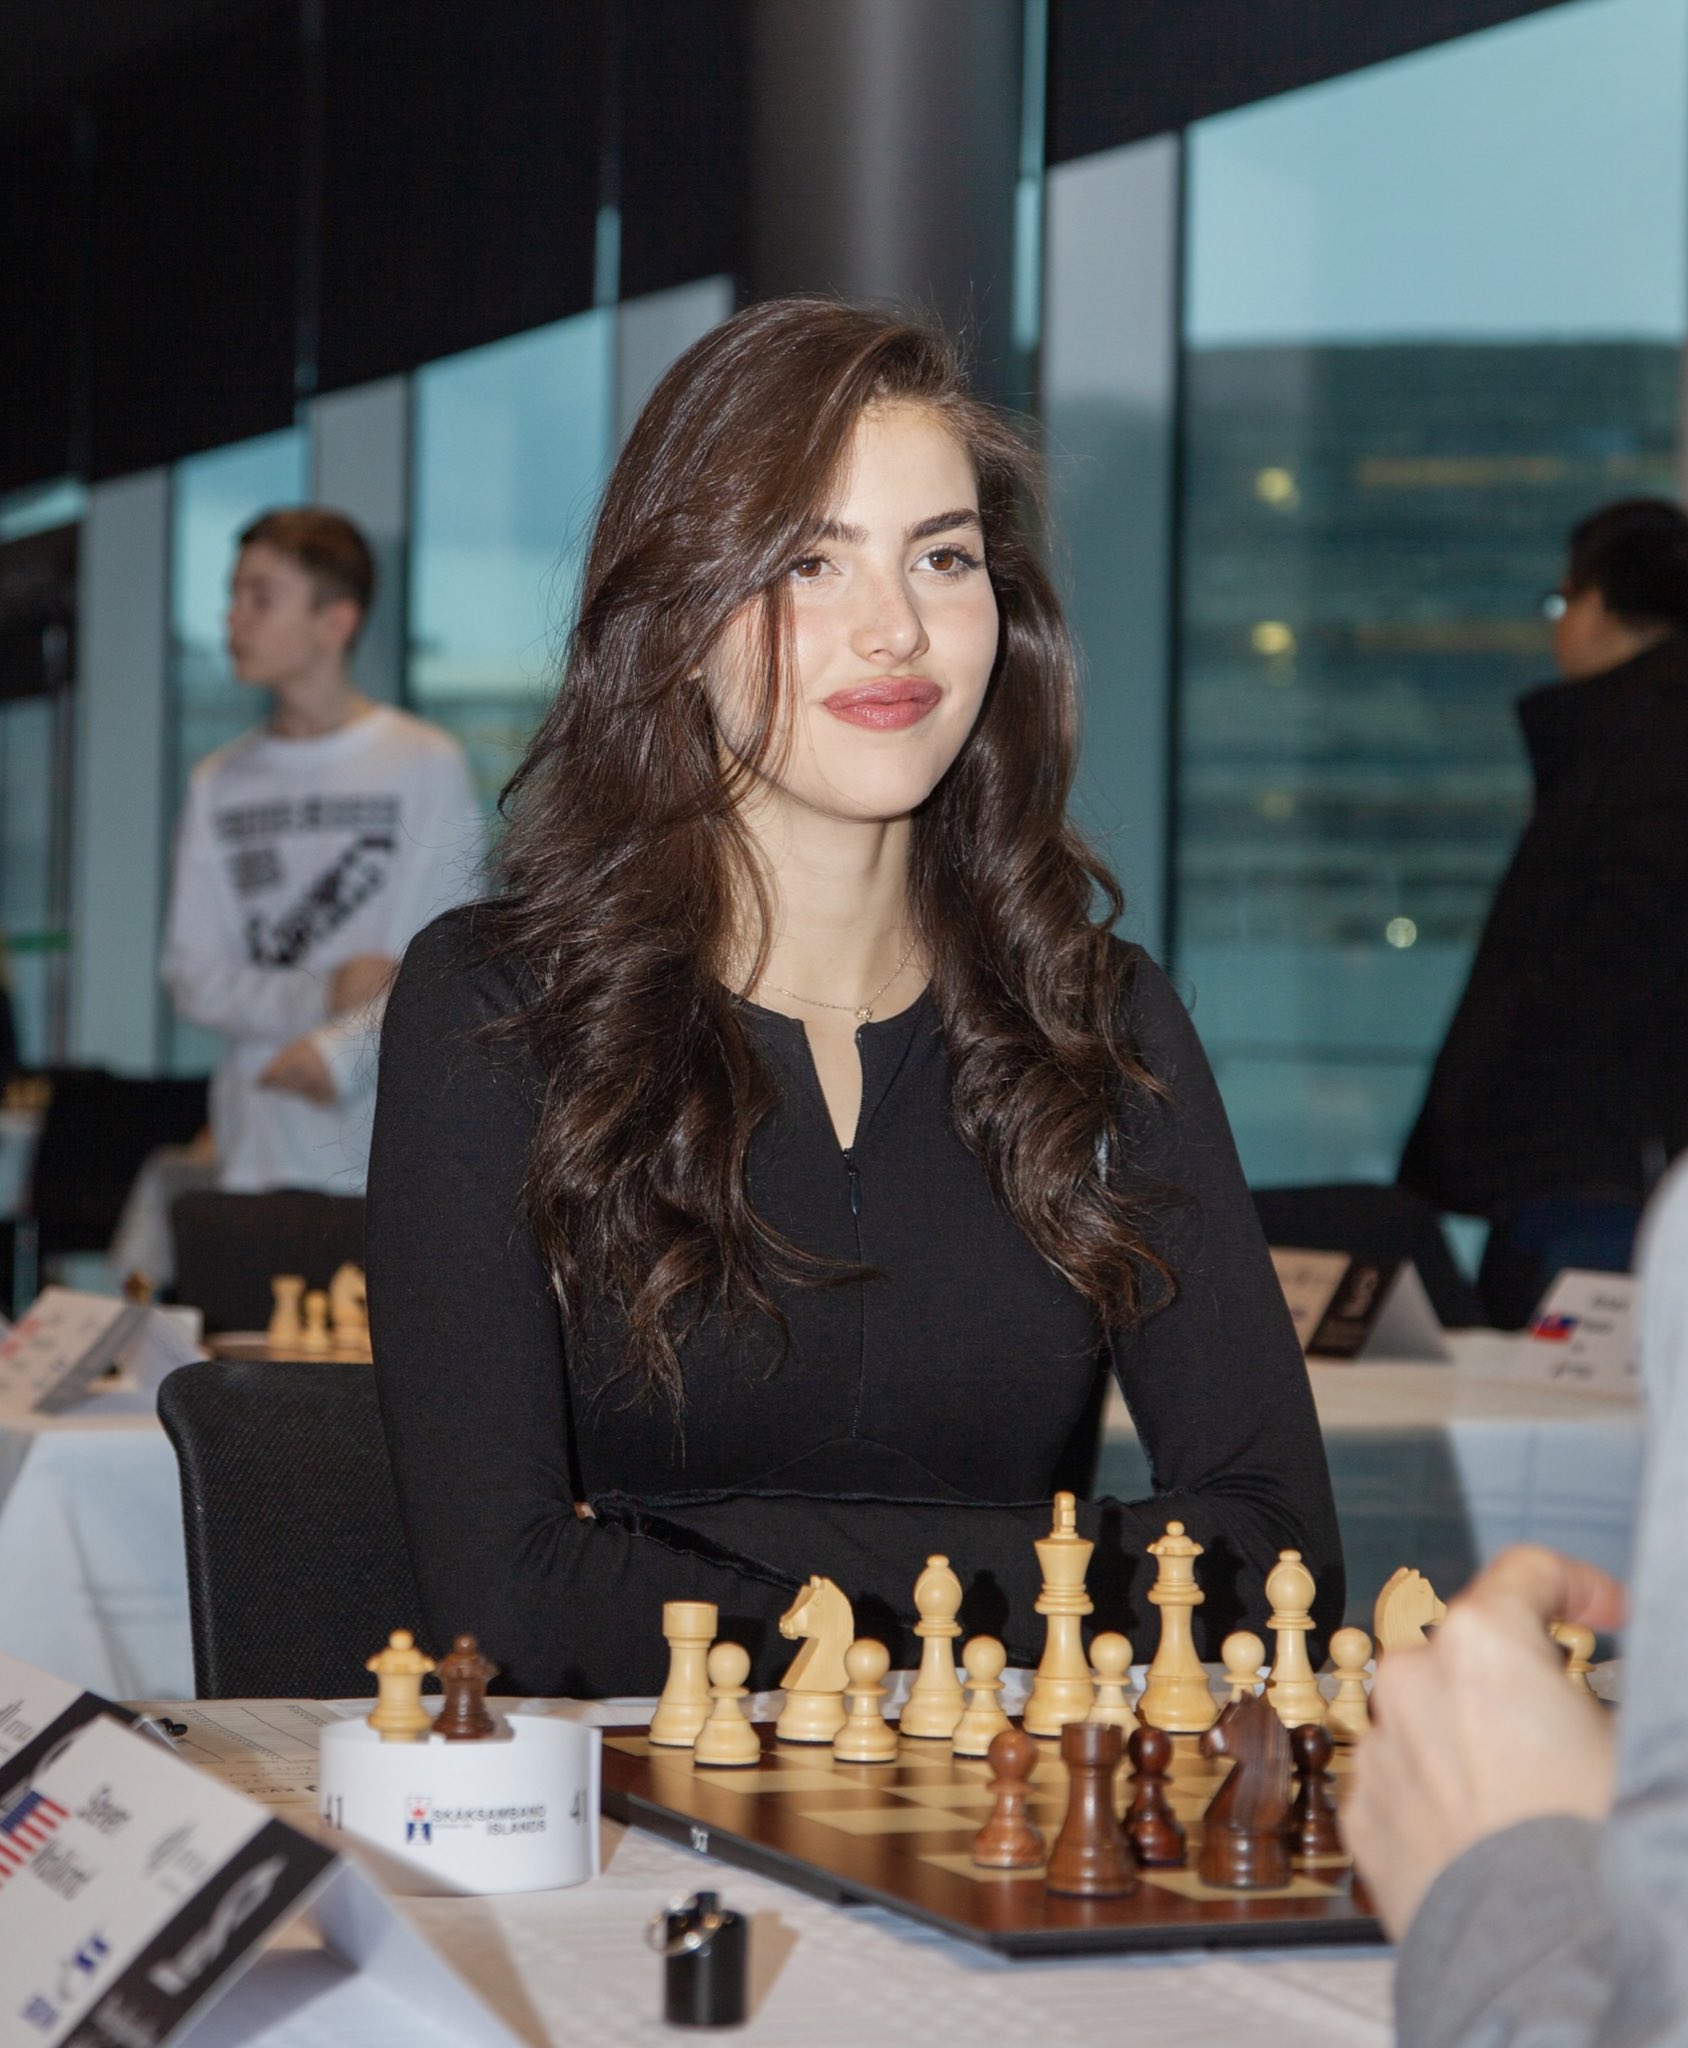 Alexandra Botez - With some good luck I finished with 5/6 and tied for  first at the Oregon Open! It was an exciting event with an amazing amount  of upsets. Picture taken